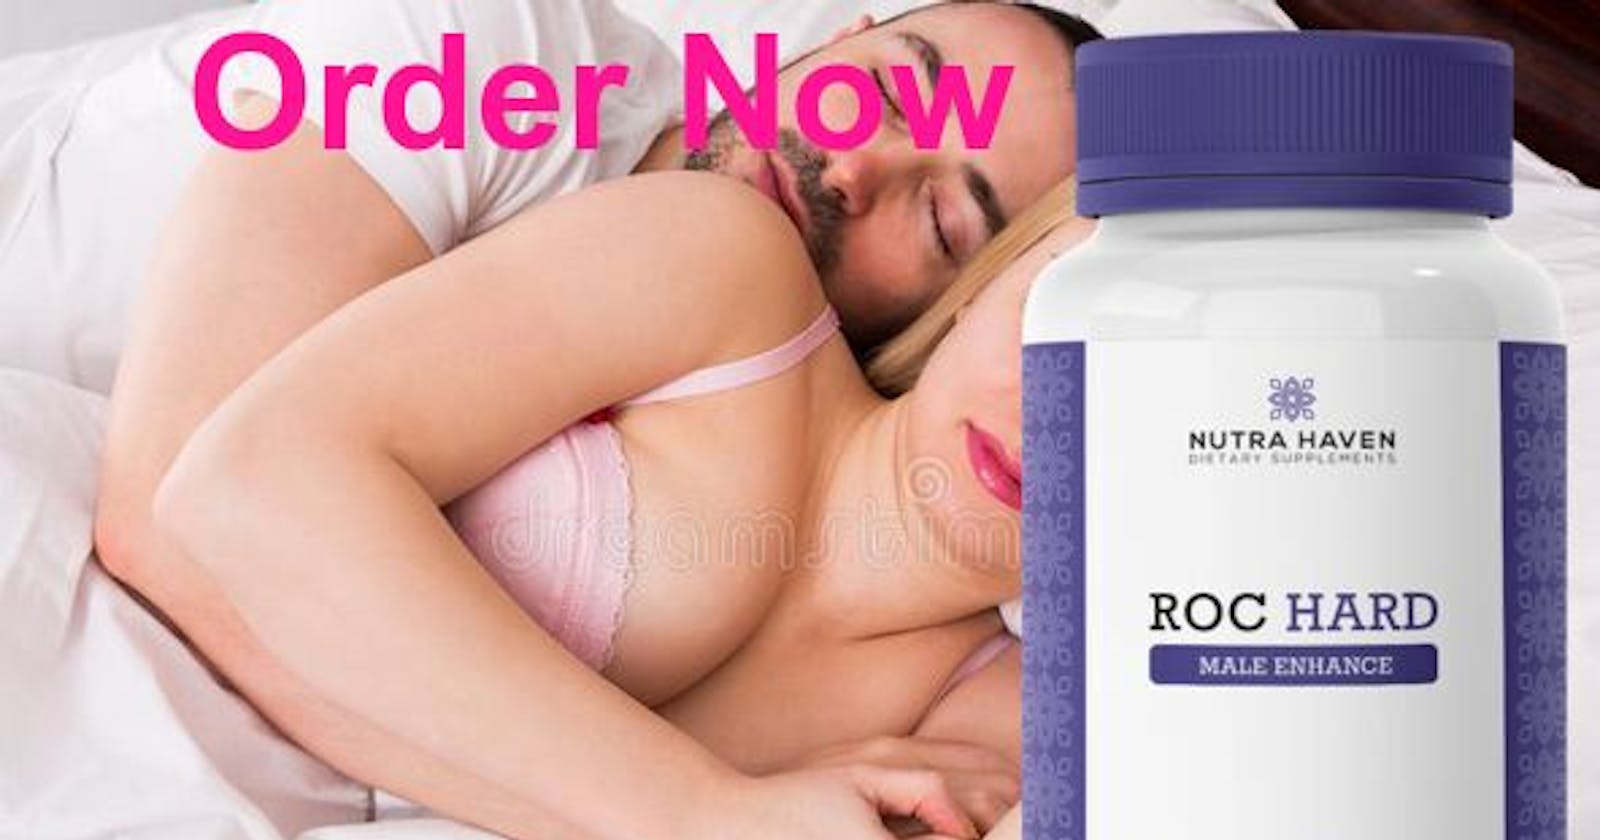 Roc Hard Male Enhancement (Scam or Legit?) Pills That Work or Fake Hype?
Special Offer!